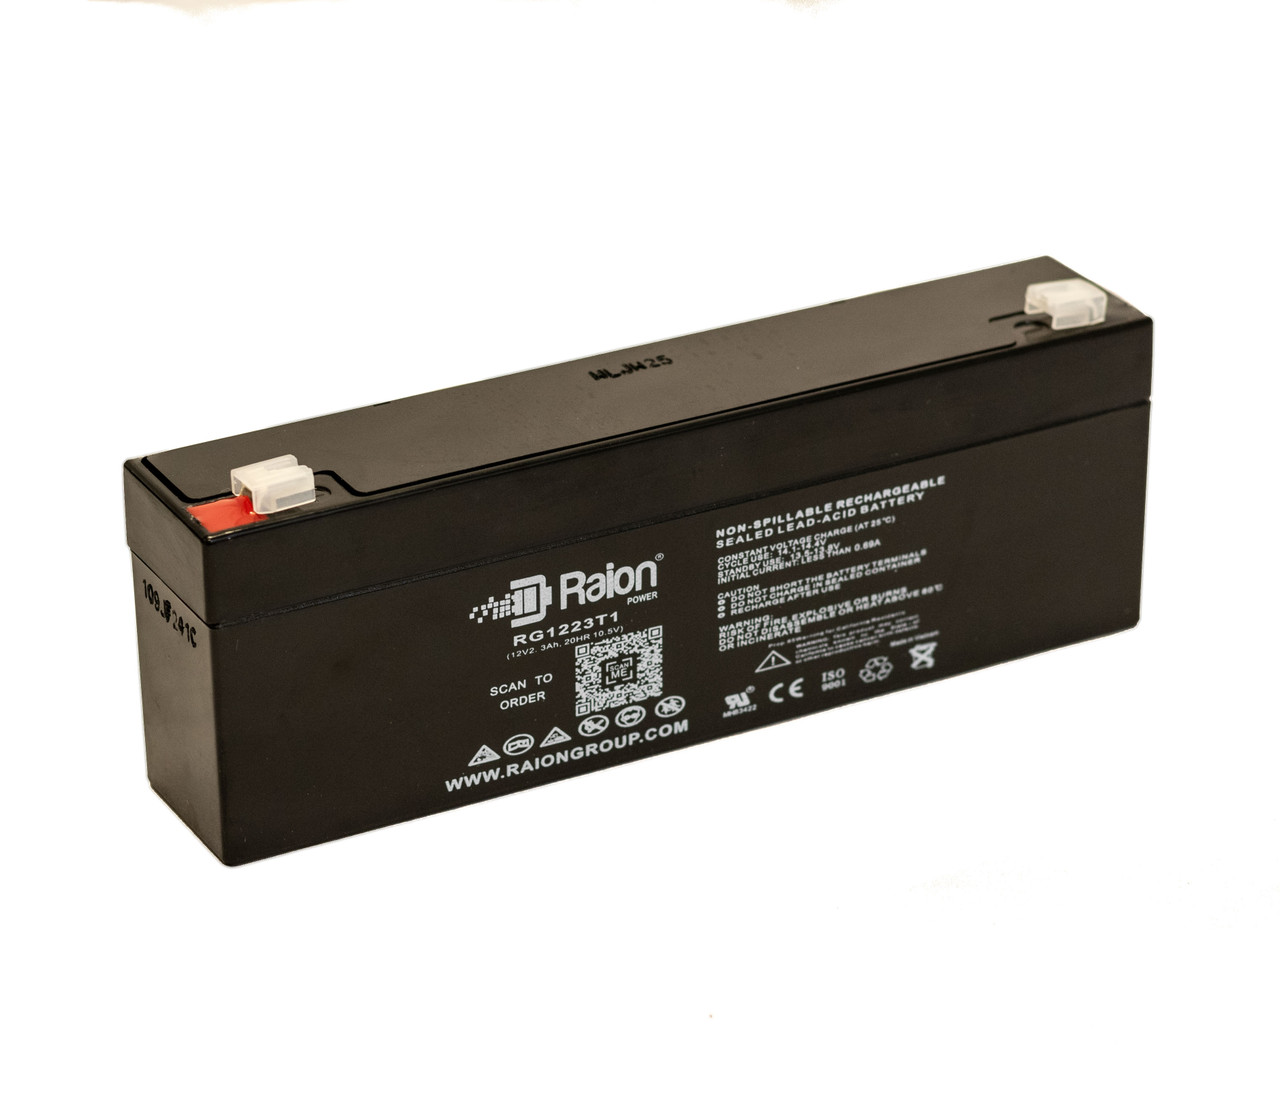 Raion Power RG1223T1 Replacement Battery for Criticare Systems 5070P VSM